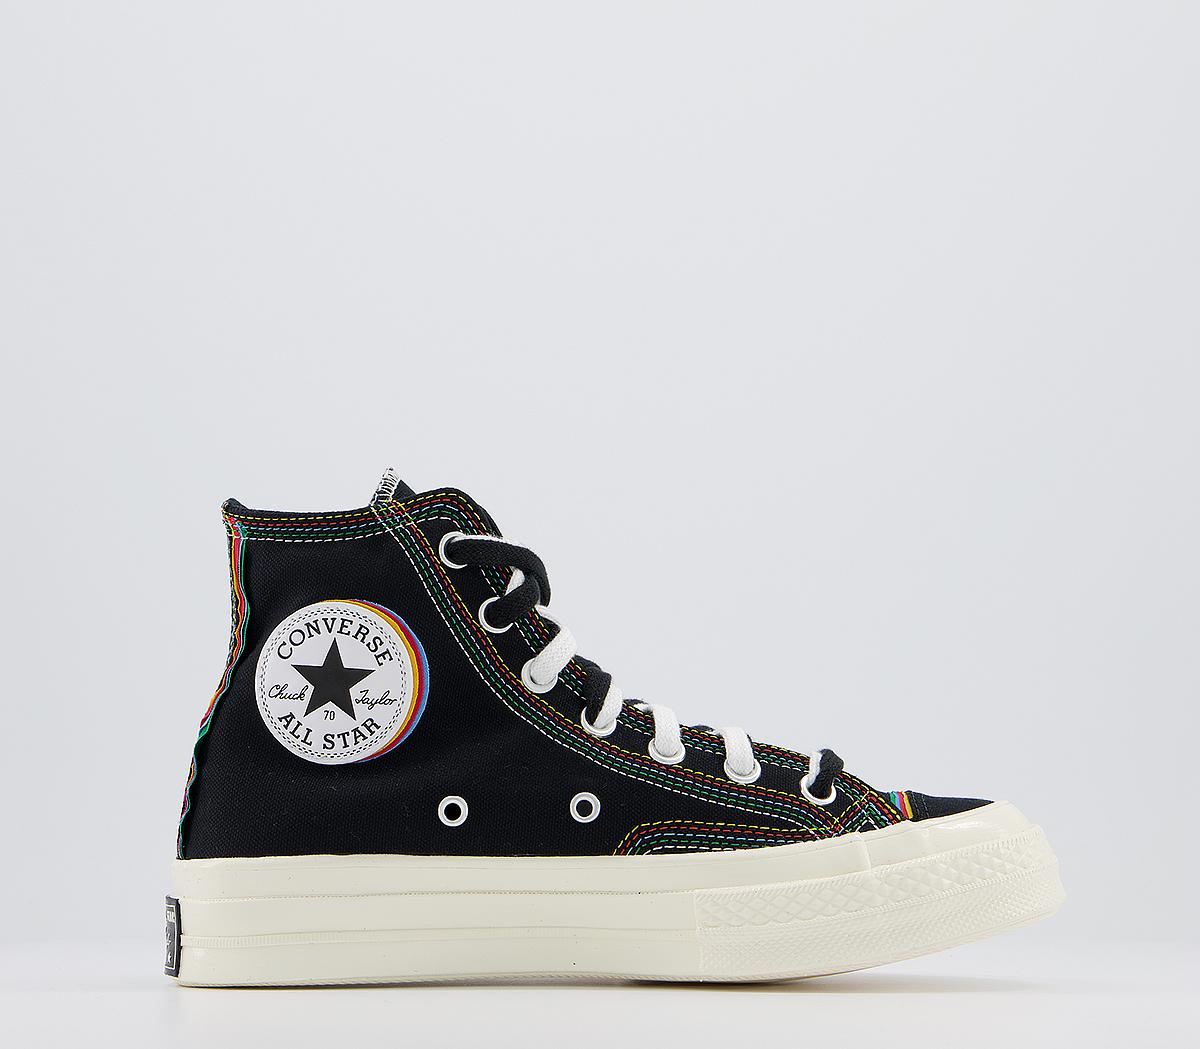 Converse All Star Hi 70 S Trainers Black Multi Egret Layers Exclusive -  Unisex Sports